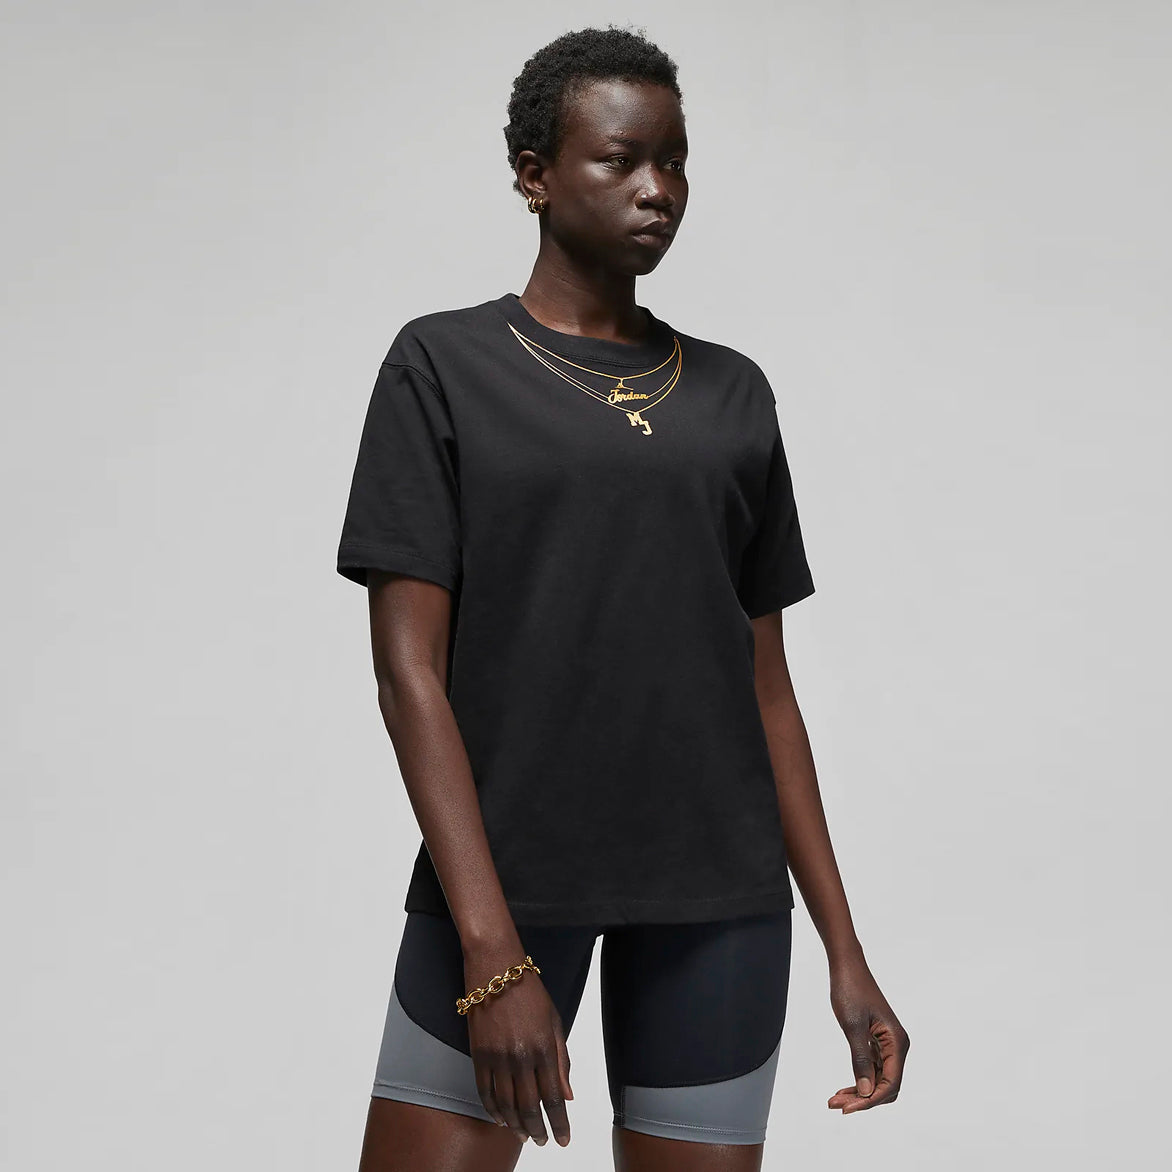 WMNS HERITAGE GOLD CHAIN TEE - BLACK